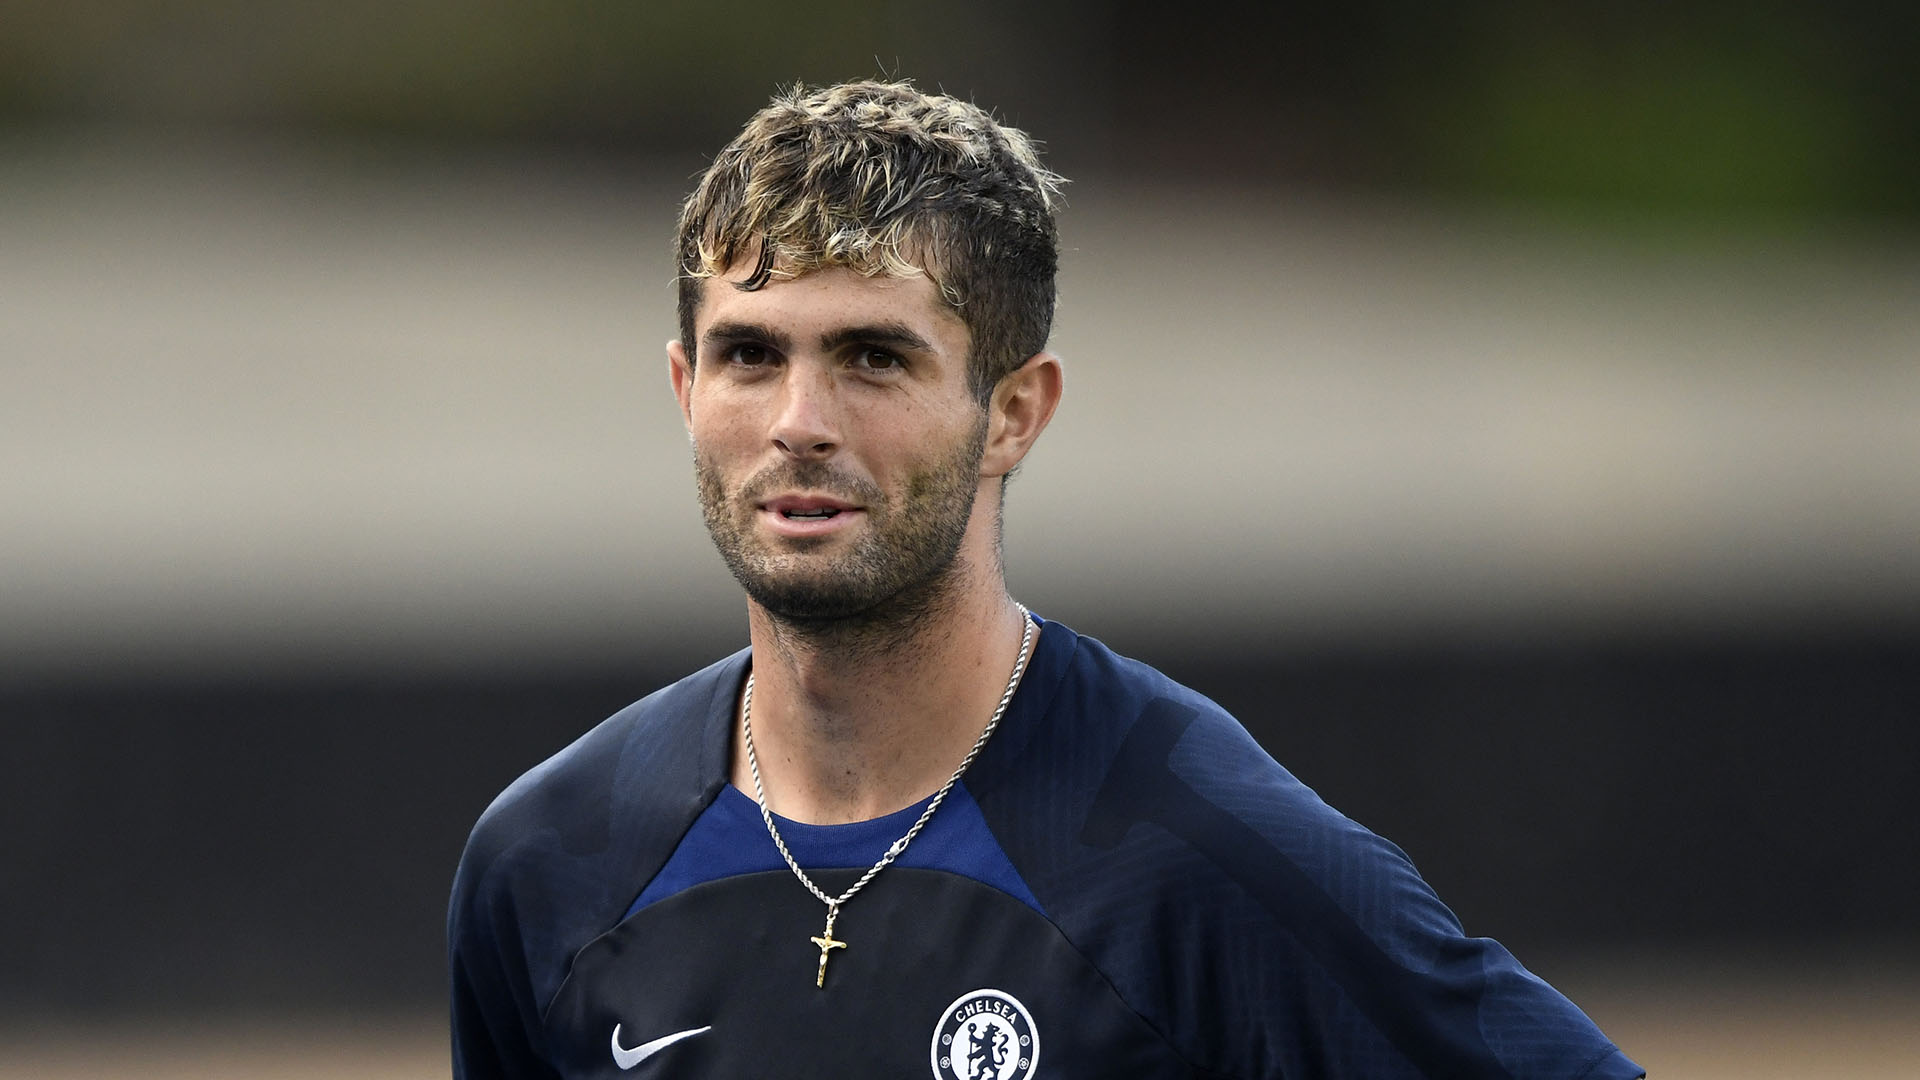 Chelsea outcast Christian Pulisic could be handed a career lifeline by Napoli, as they prepare to receive offers for their Scudetto-winning stars come June.